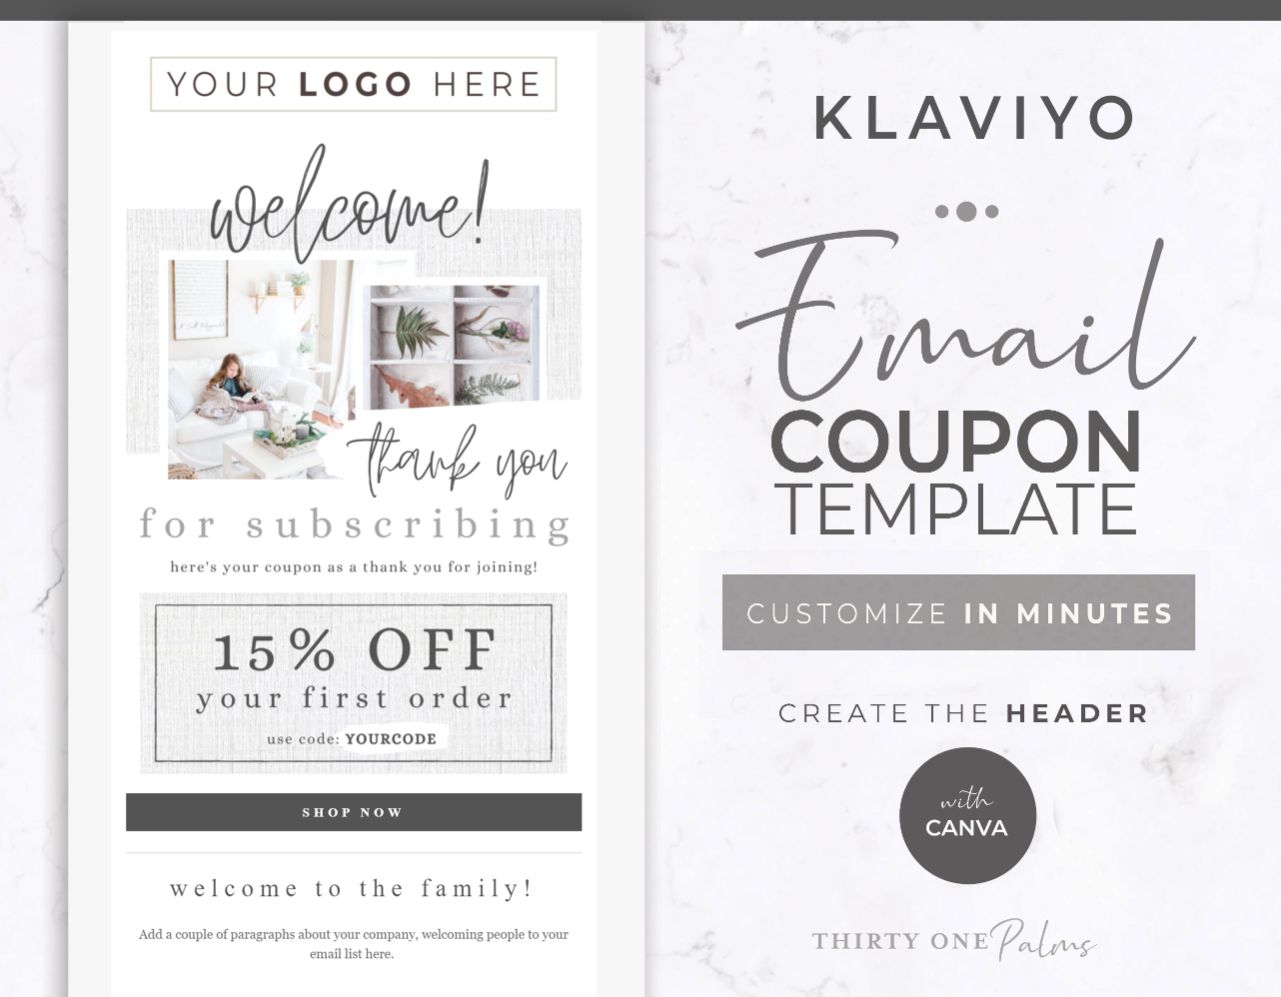 Email Template for Canva & Klaviyo – Welcome Coupon – White Linen